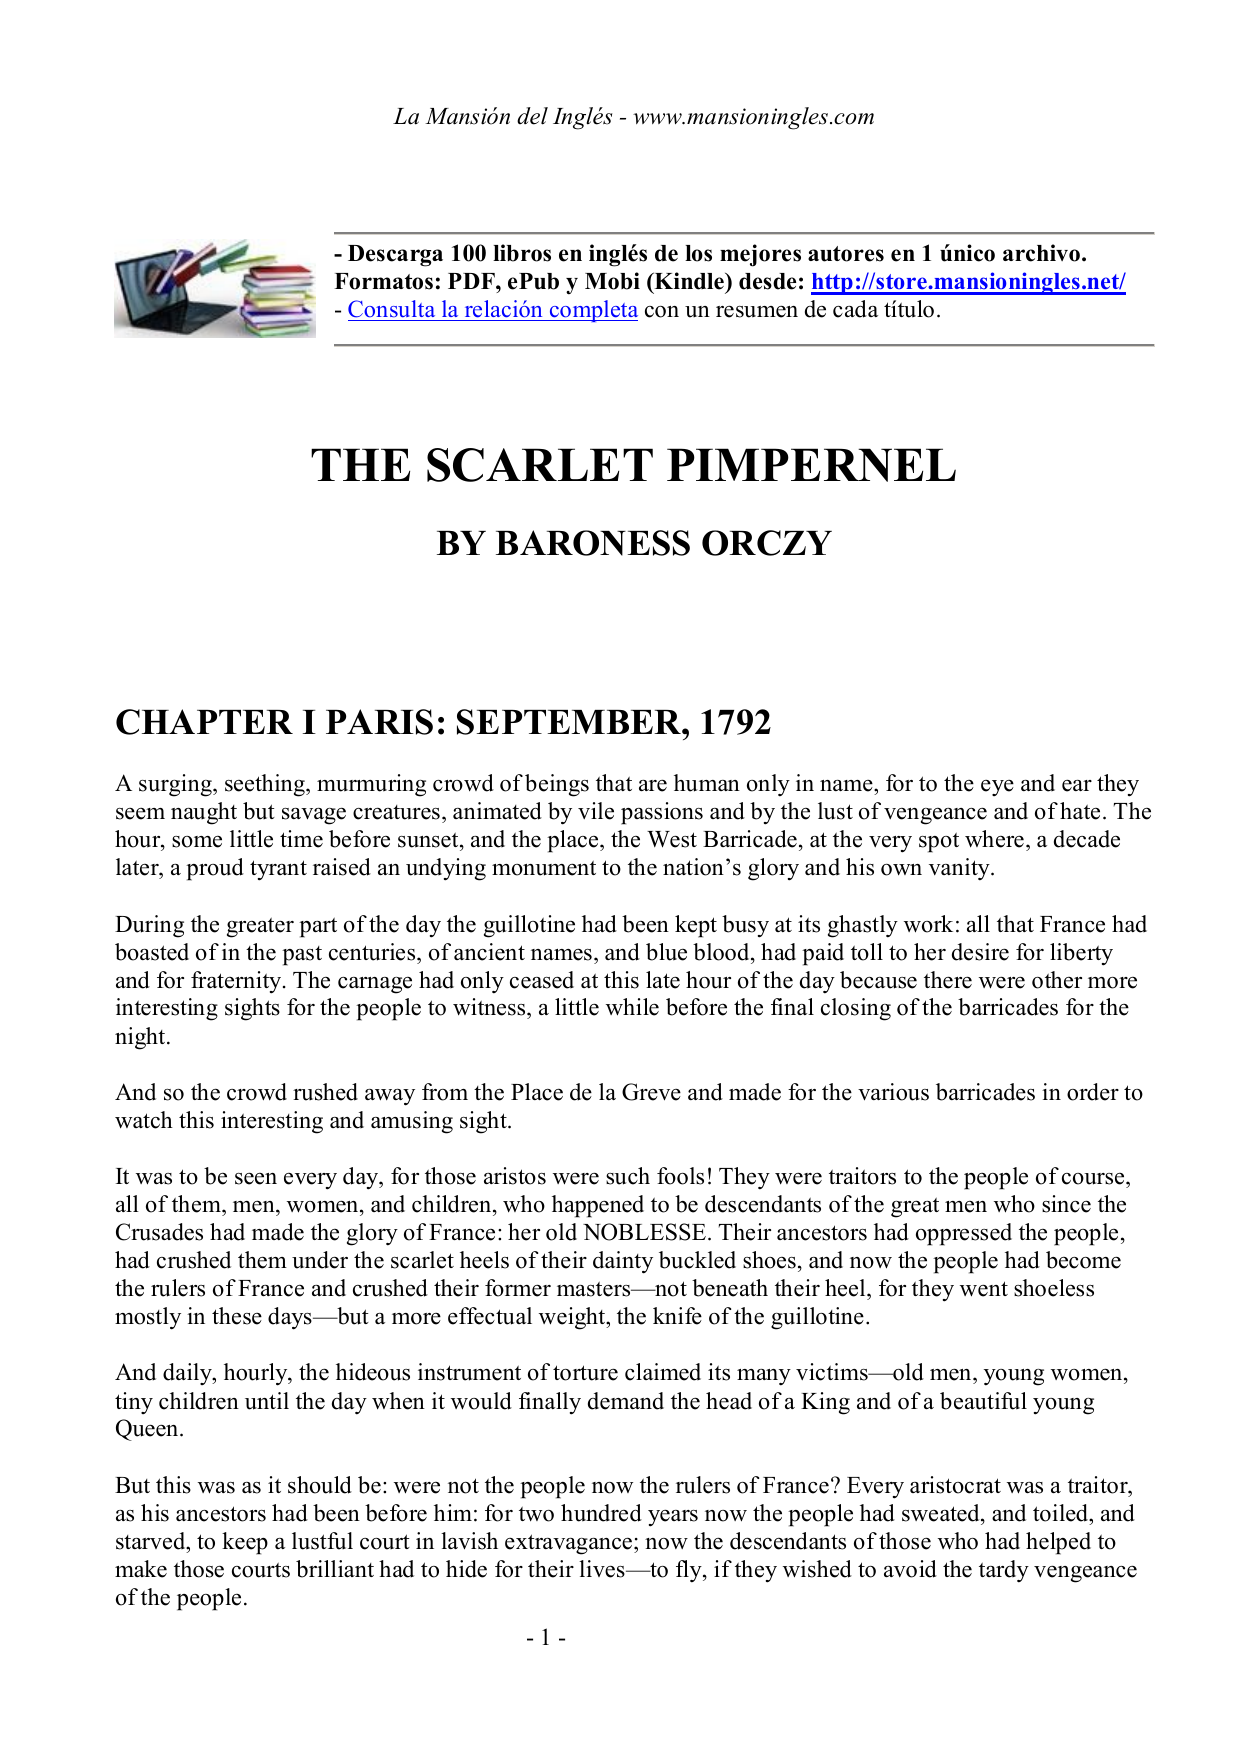 the scarlet pimpernel by baroness orczy